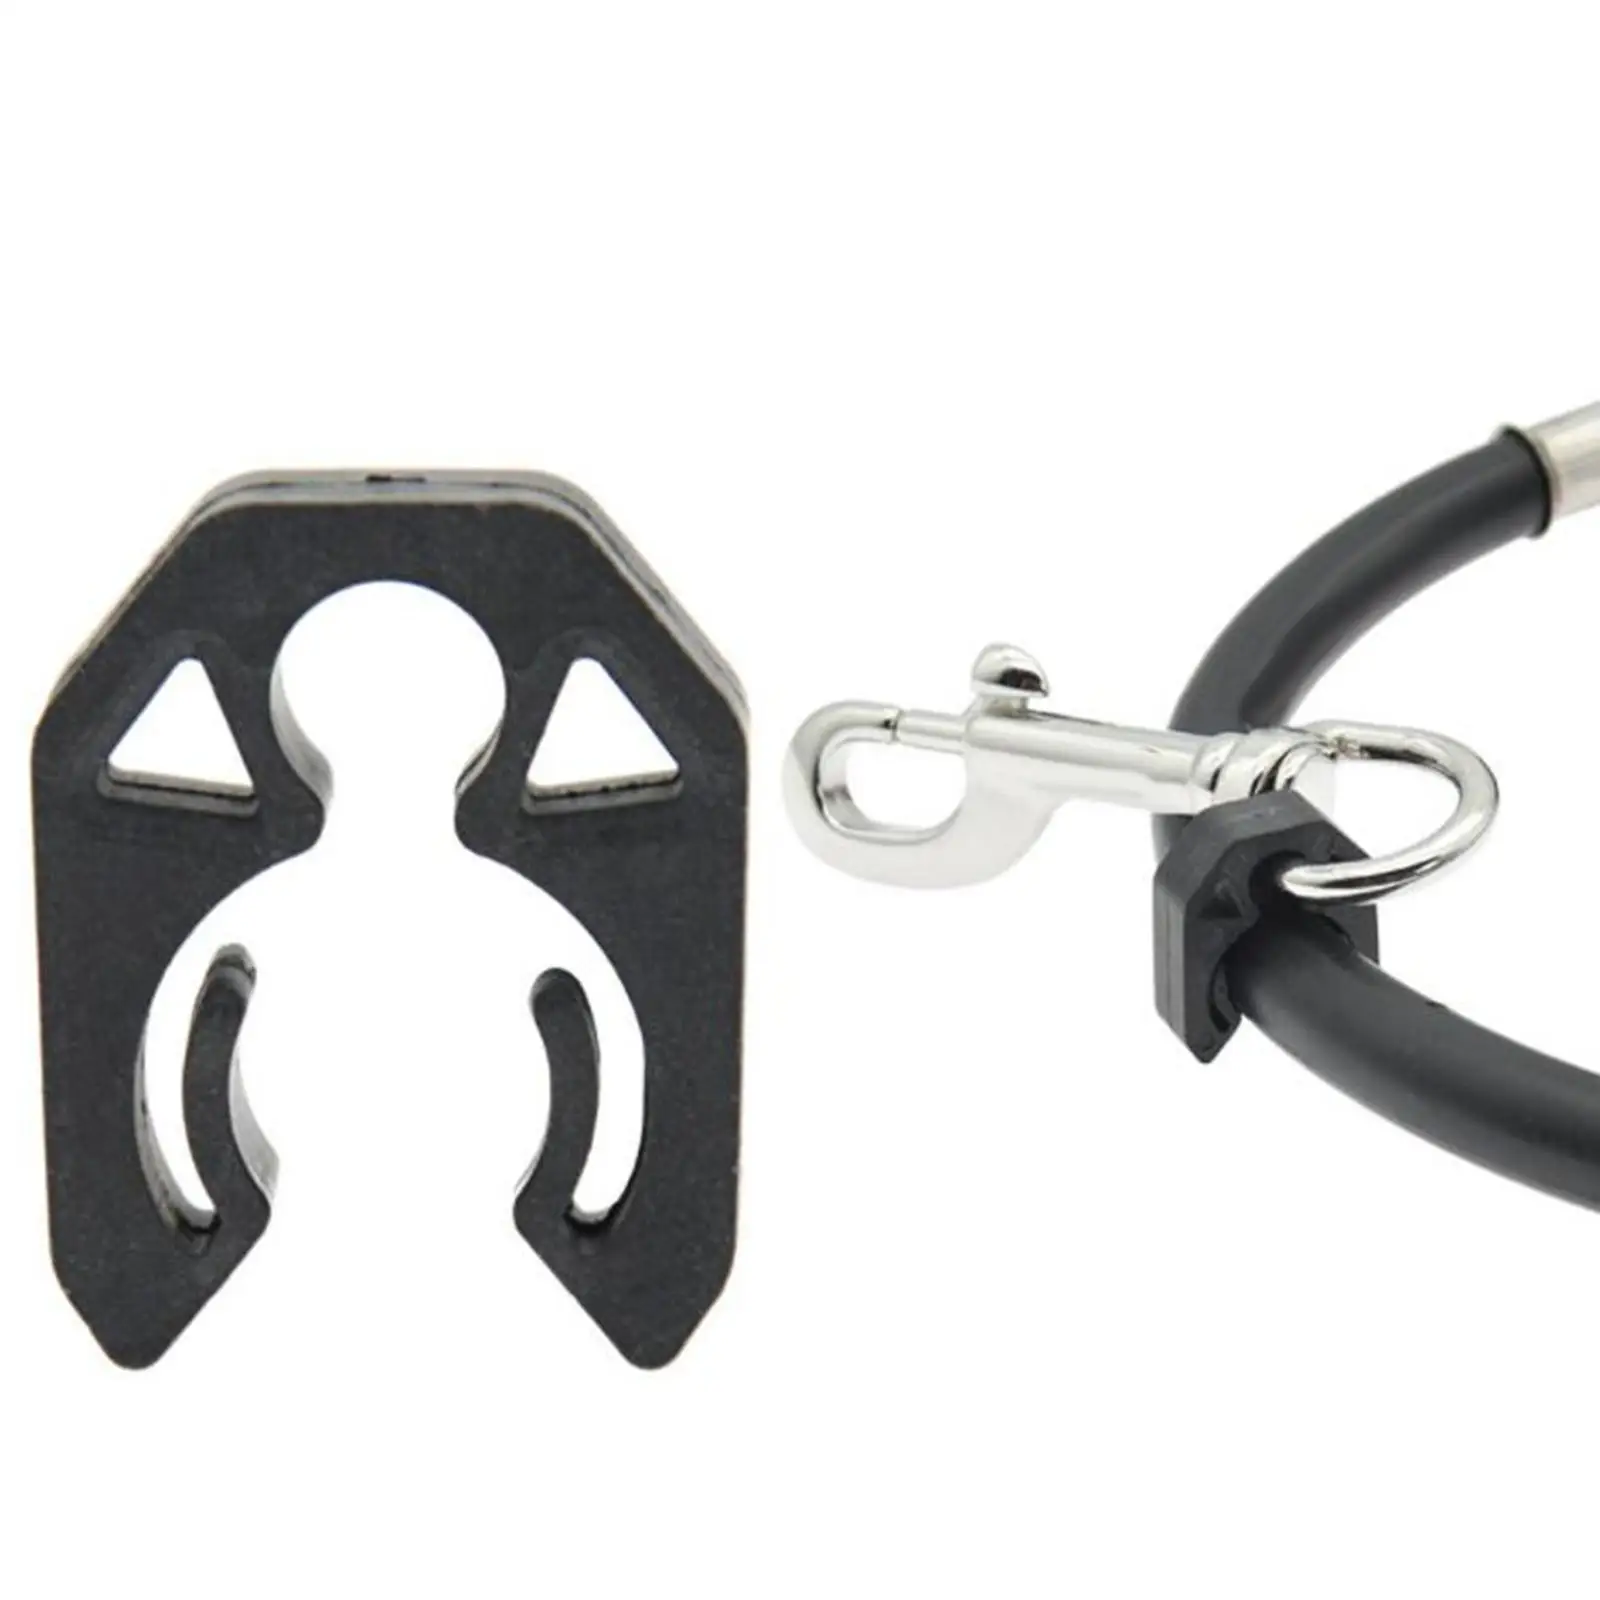 Scuba Diving Fixed Hook Durable Upgrade Parts Double BCD Hose Clip Plastic Hook Buckle for Dive Snorkeling Accessories